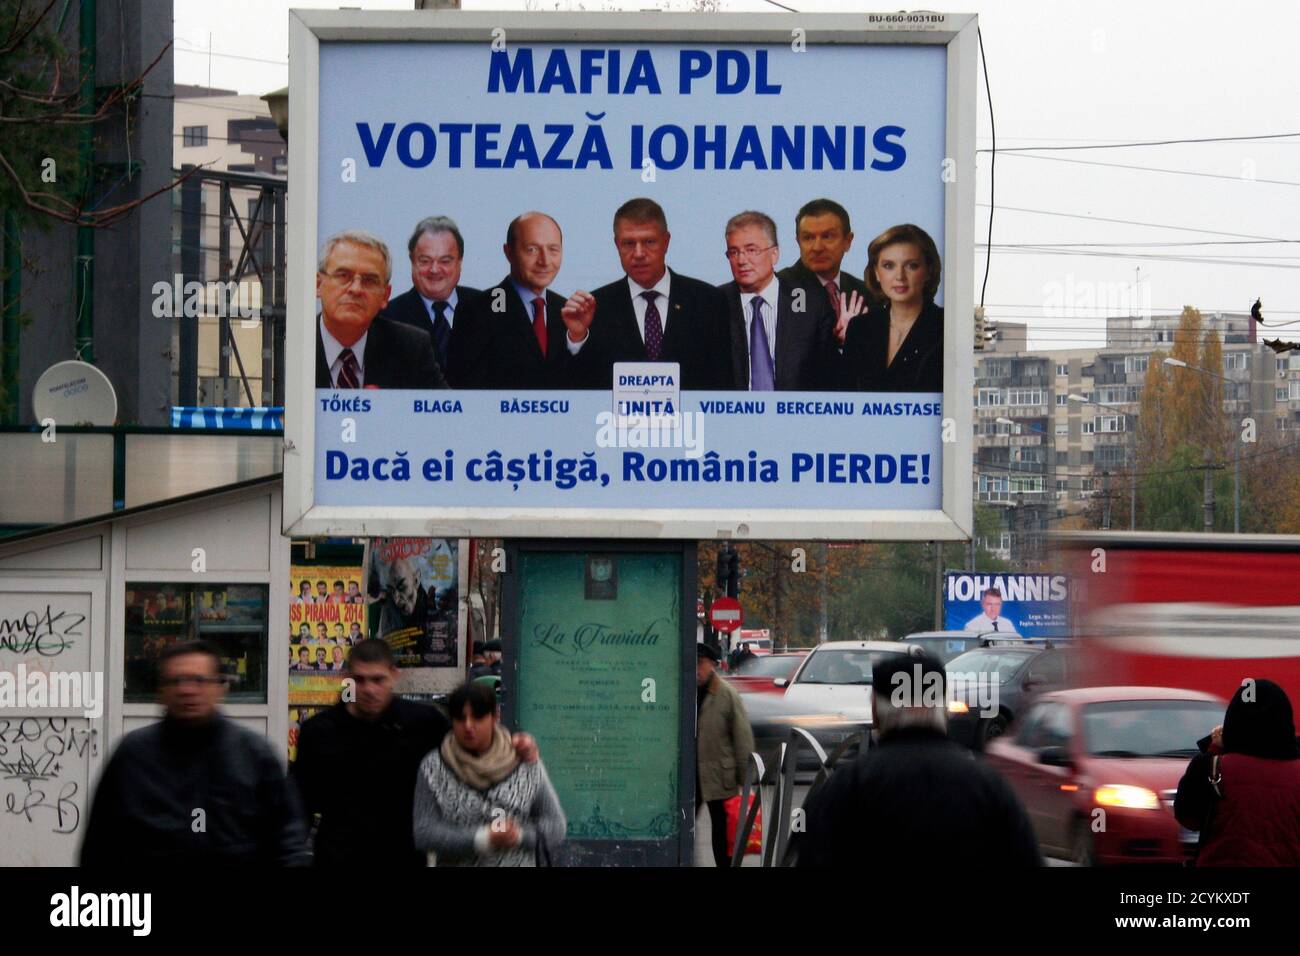 People walk past an electoral poster against Romania's presidential  candidate Klaus Iohannis (C) in Bucharest November 15, 2014. Romania's  leftist Prime Minister Victor Ponta is widely expected to win the  presidential election